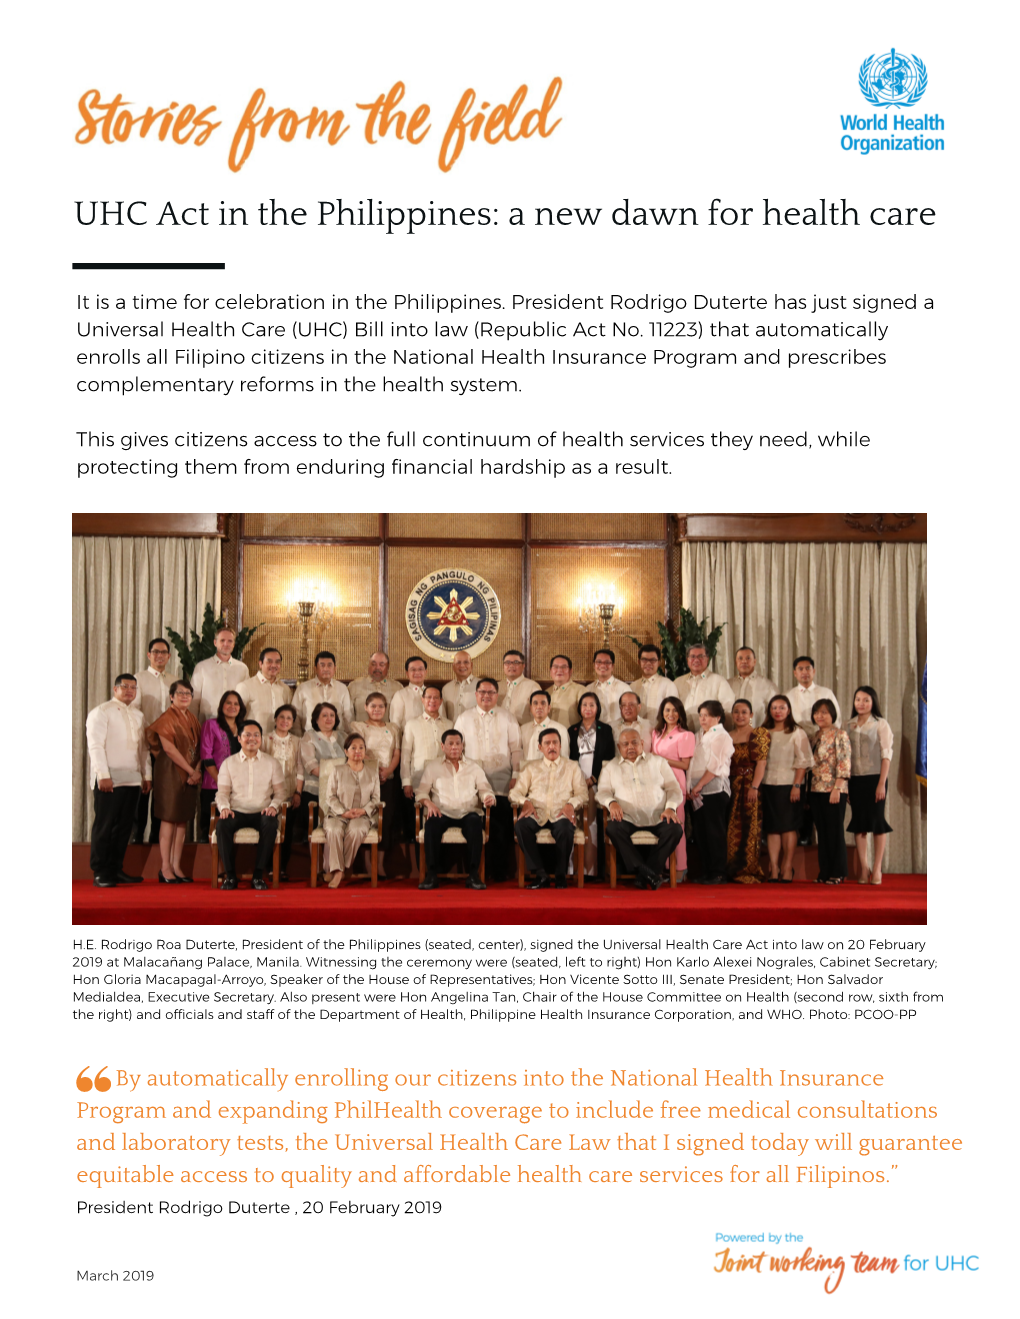 UHC Act in the Philippines: a New Dawn for Health Care